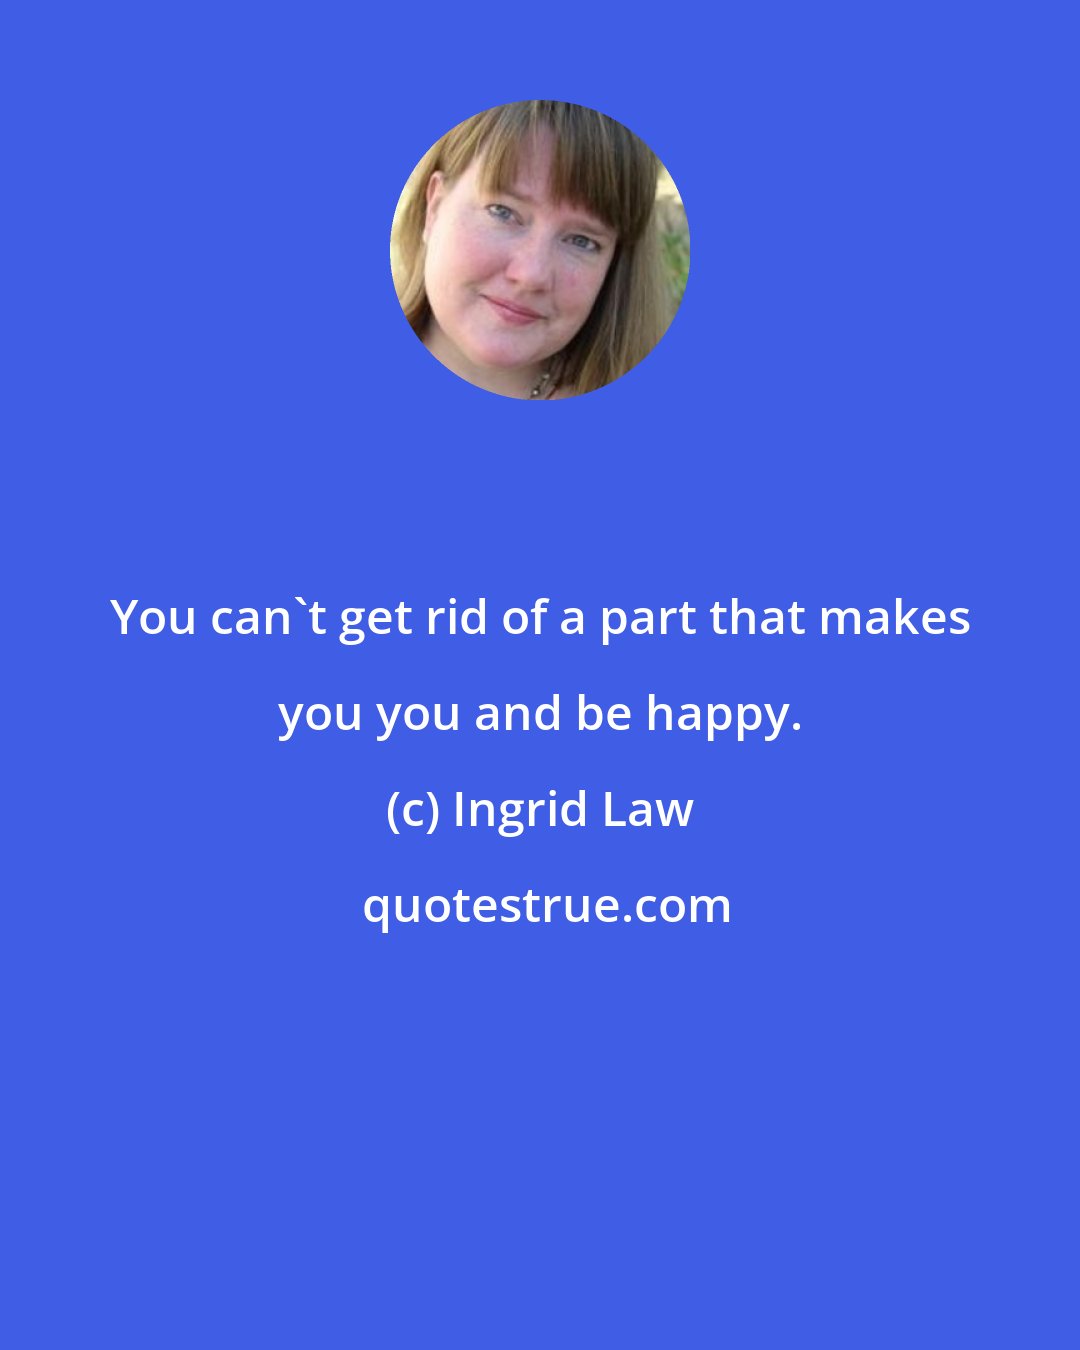 Ingrid Law: You can't get rid of a part that makes you you and be happy.